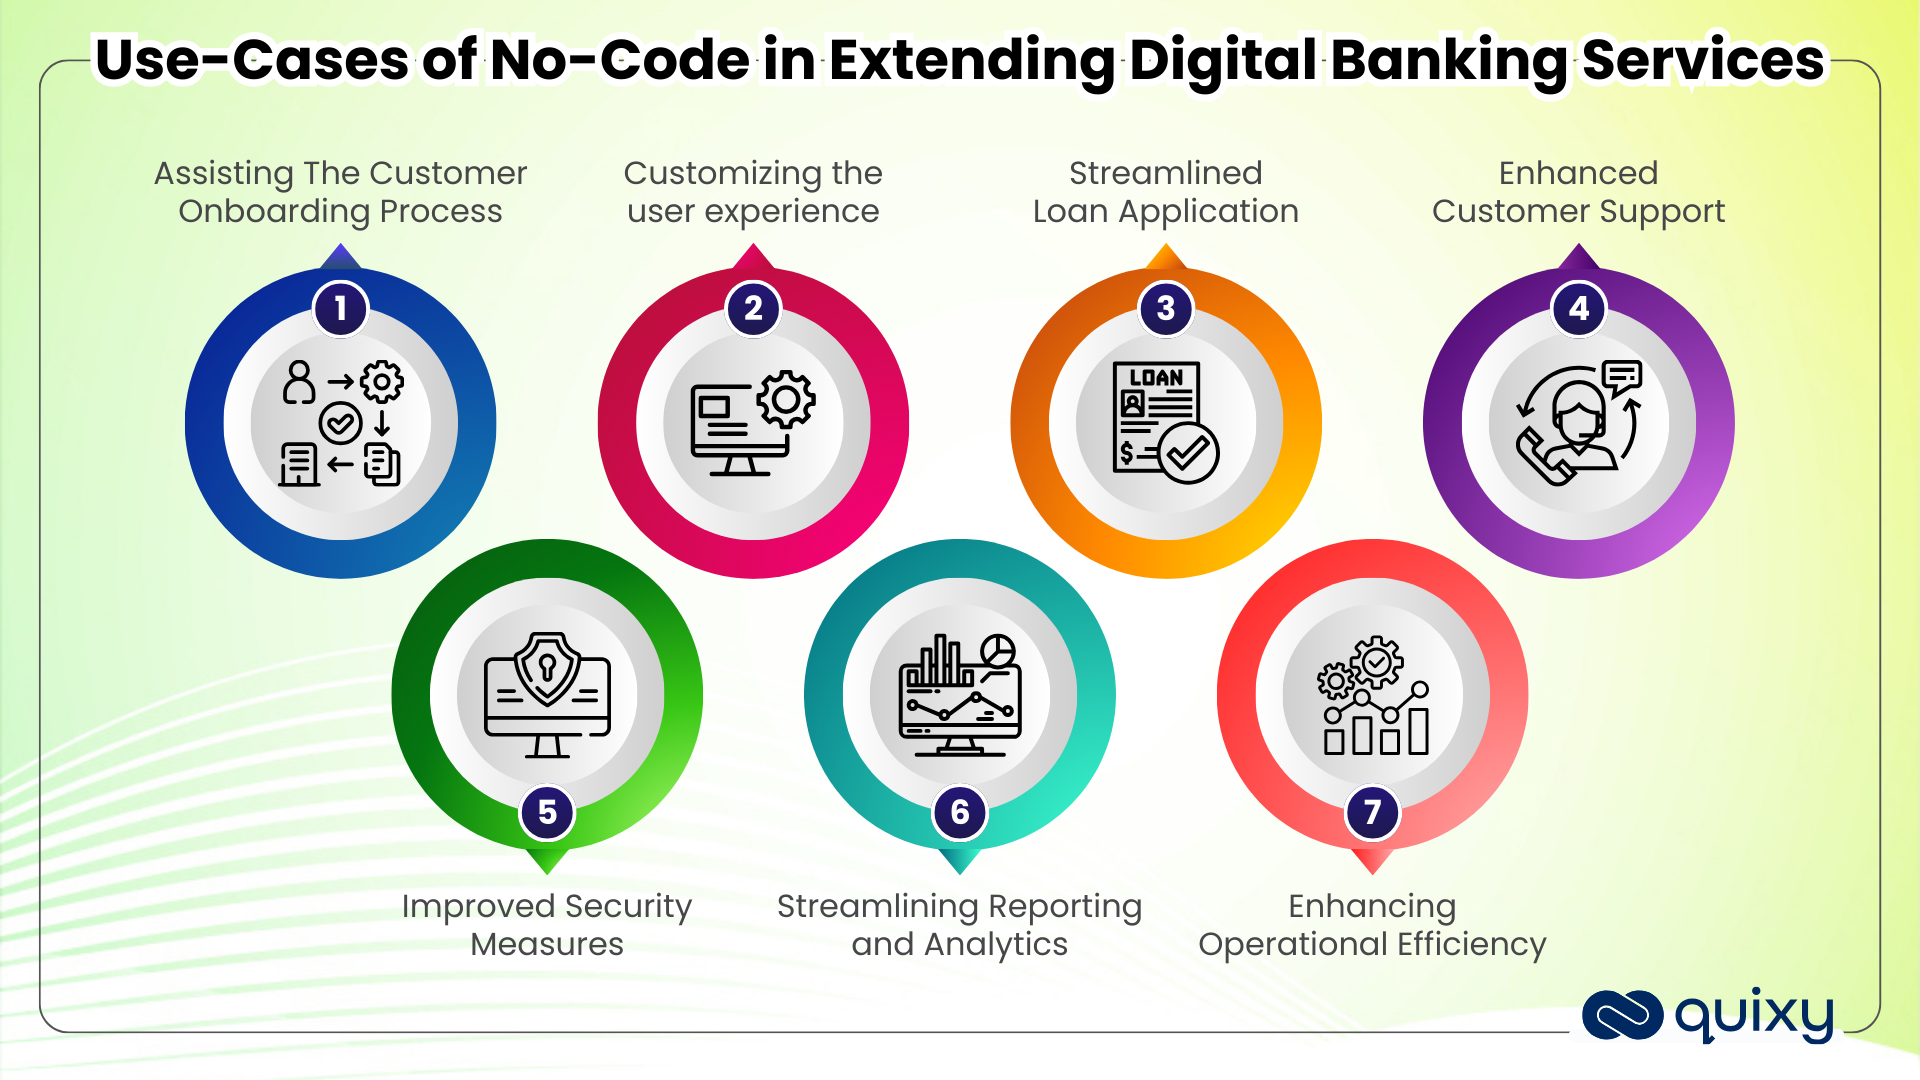 Use-Cases of No-Code in Extending Digital Banking